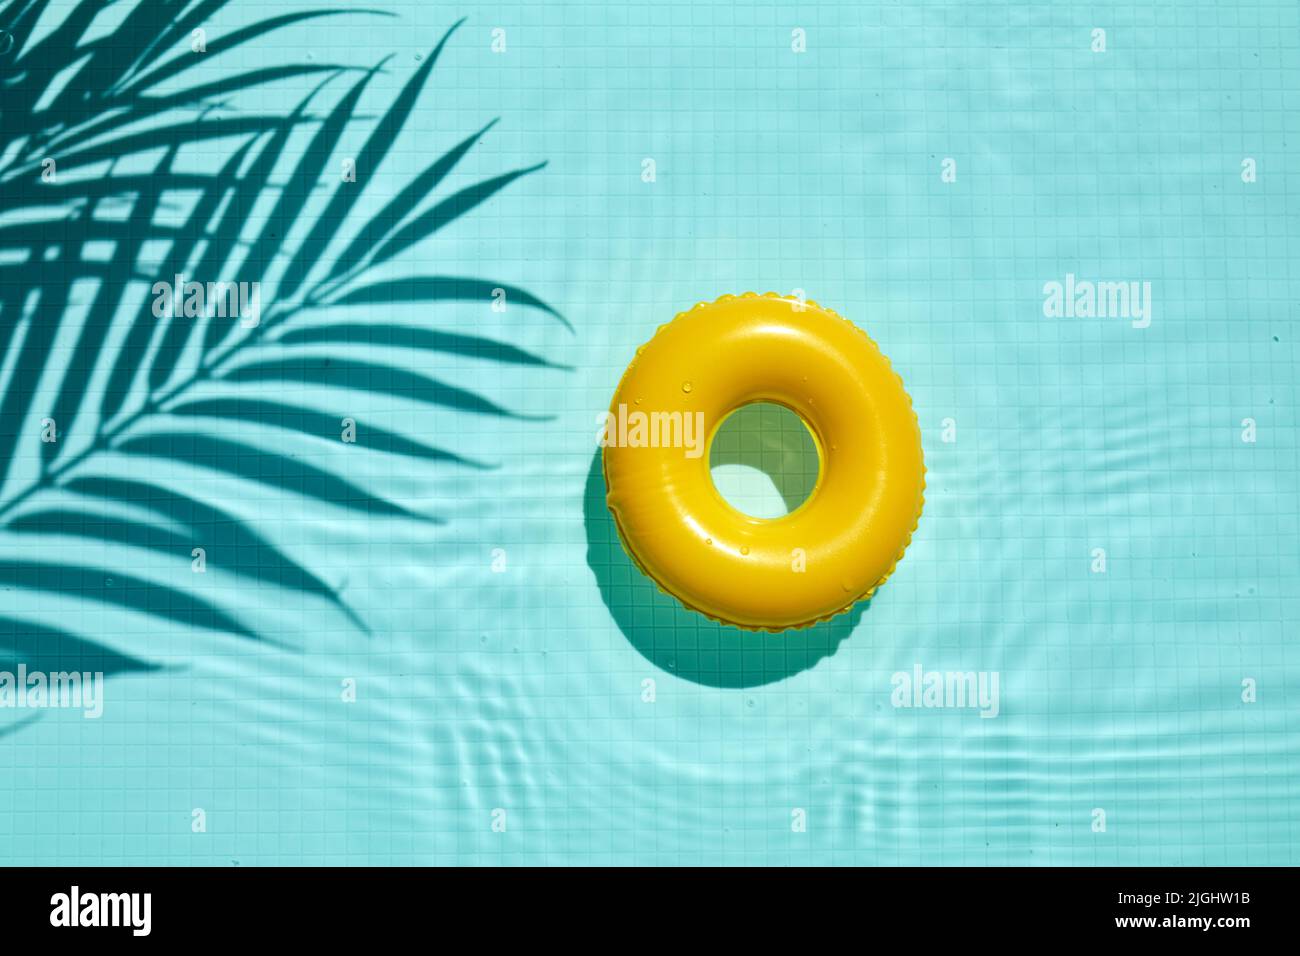 Swimming pool top view background. Water ring and palm shadows. Stock Photo